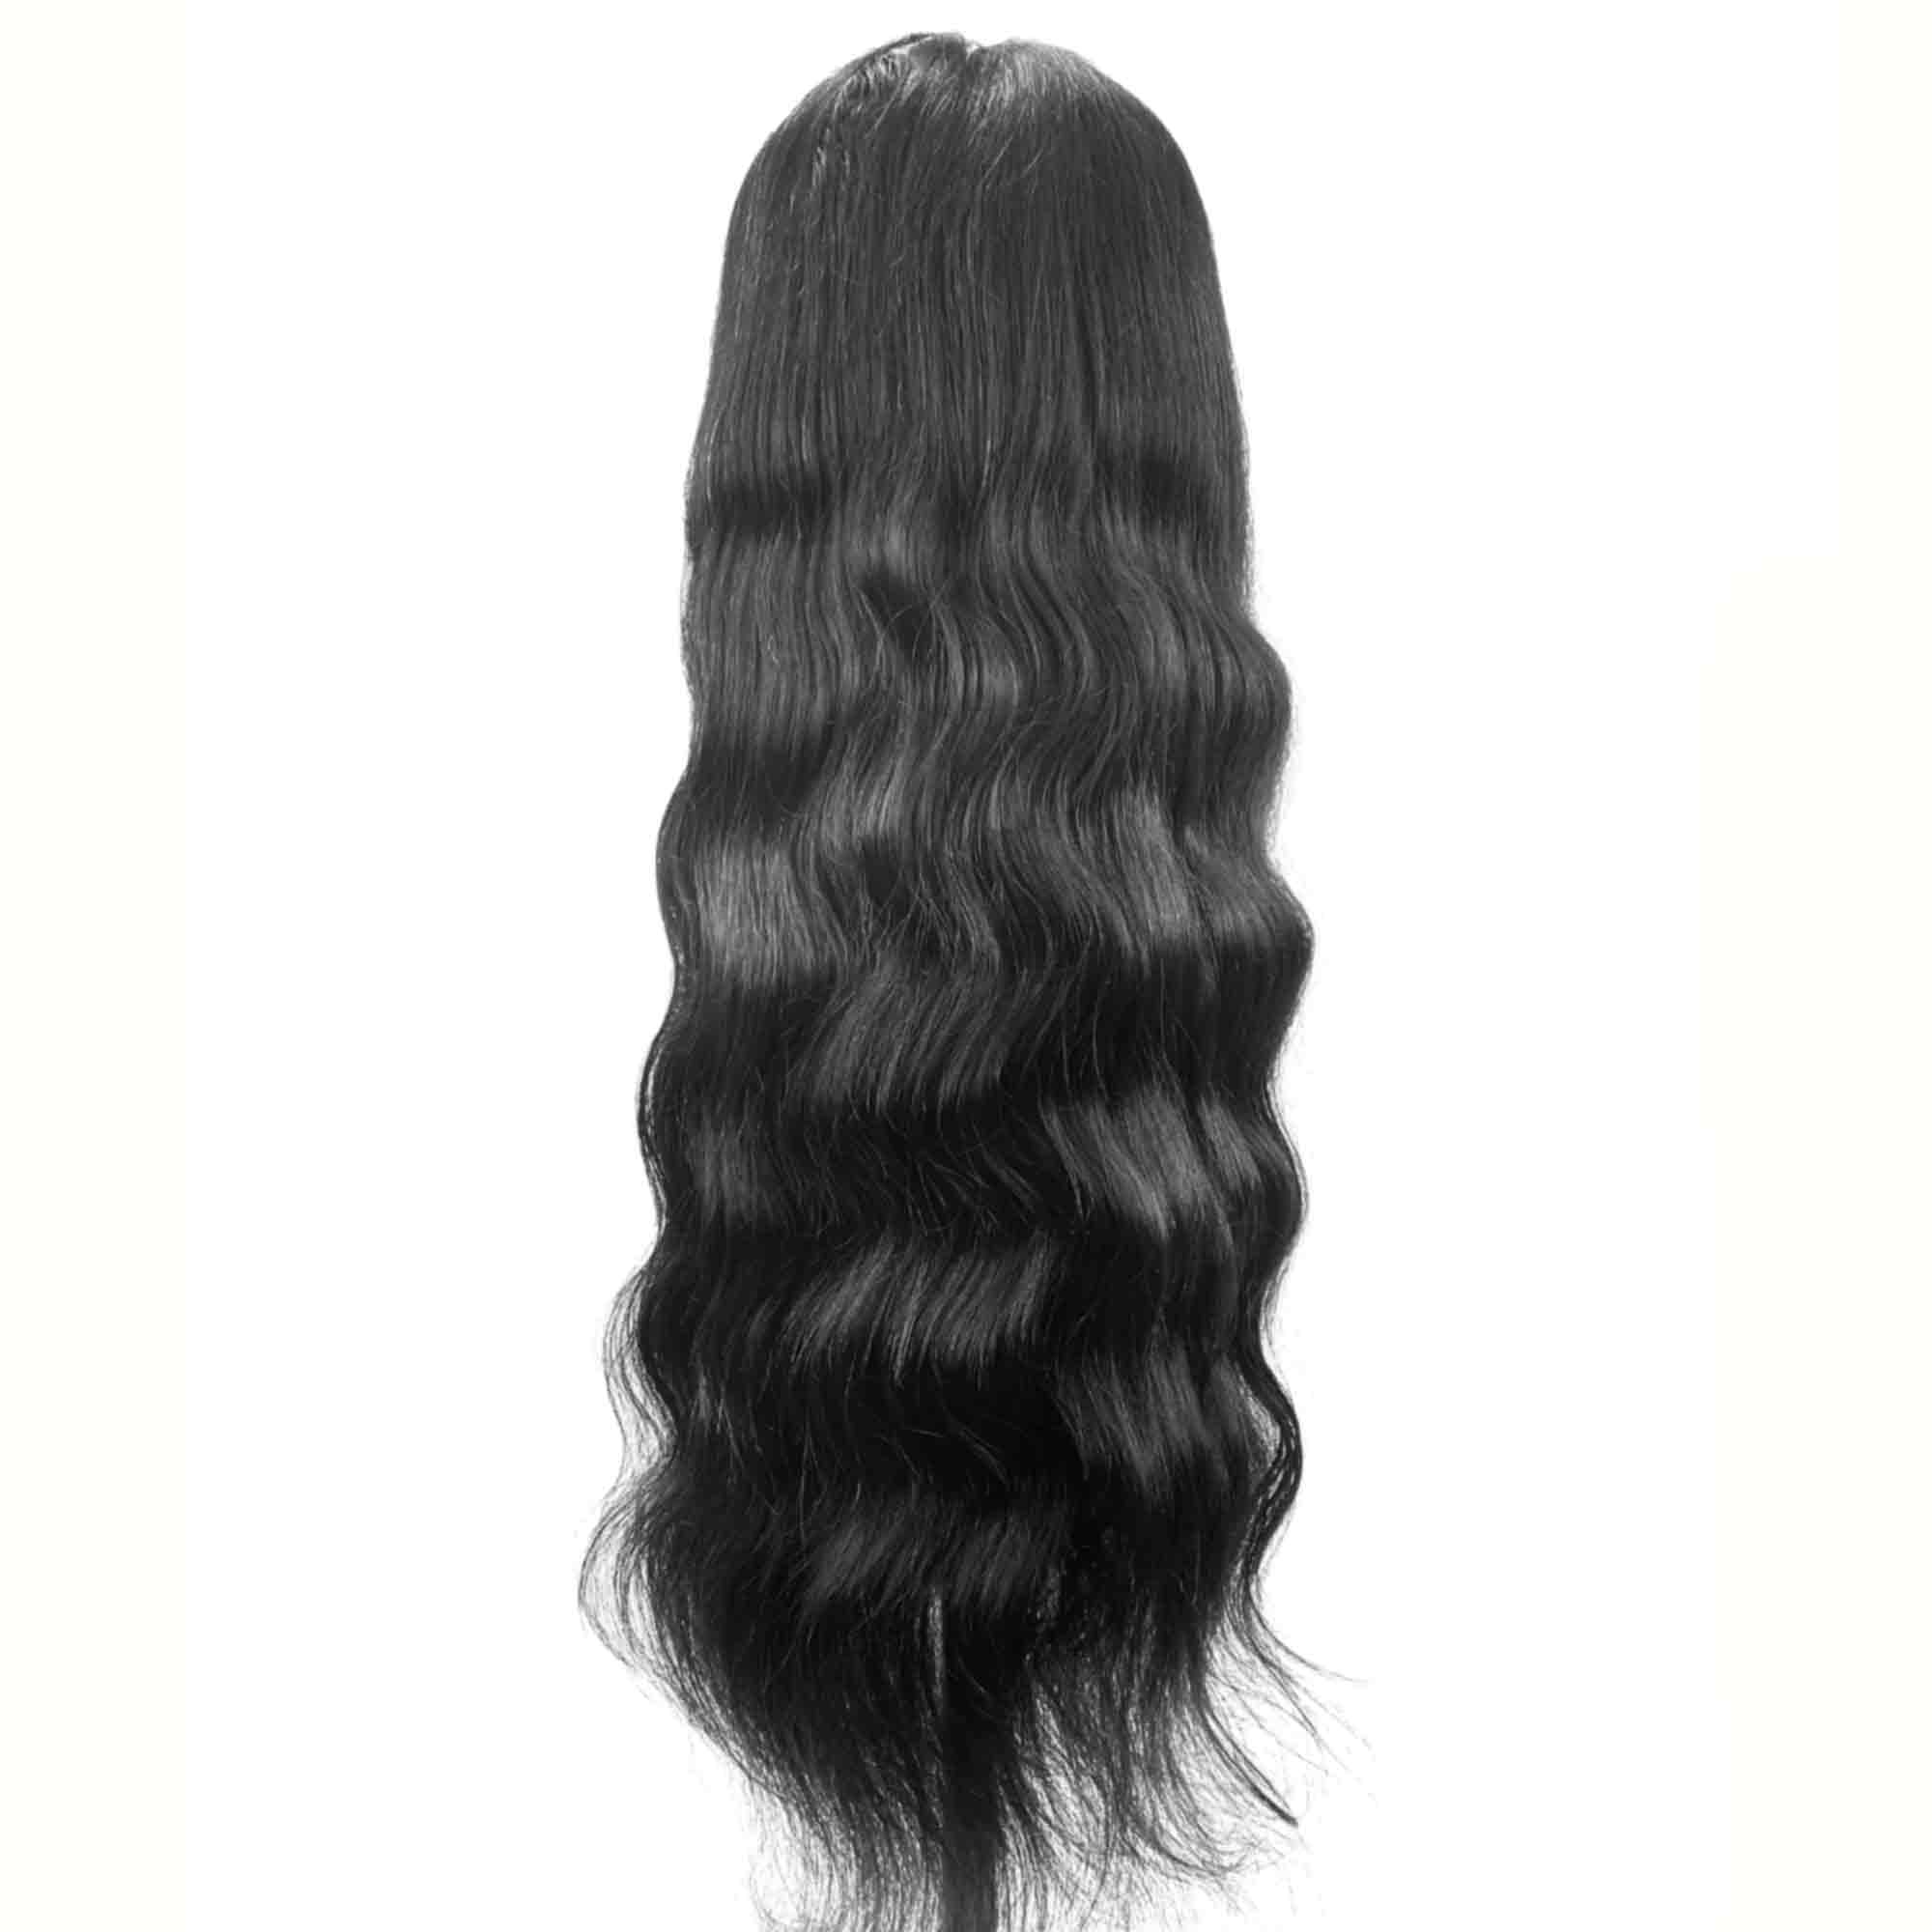 220% Density Full Transparent Lace Wig Multi-direction Parting Hand-tied 100% Unprocessed Human Hair Pick Up/Ship